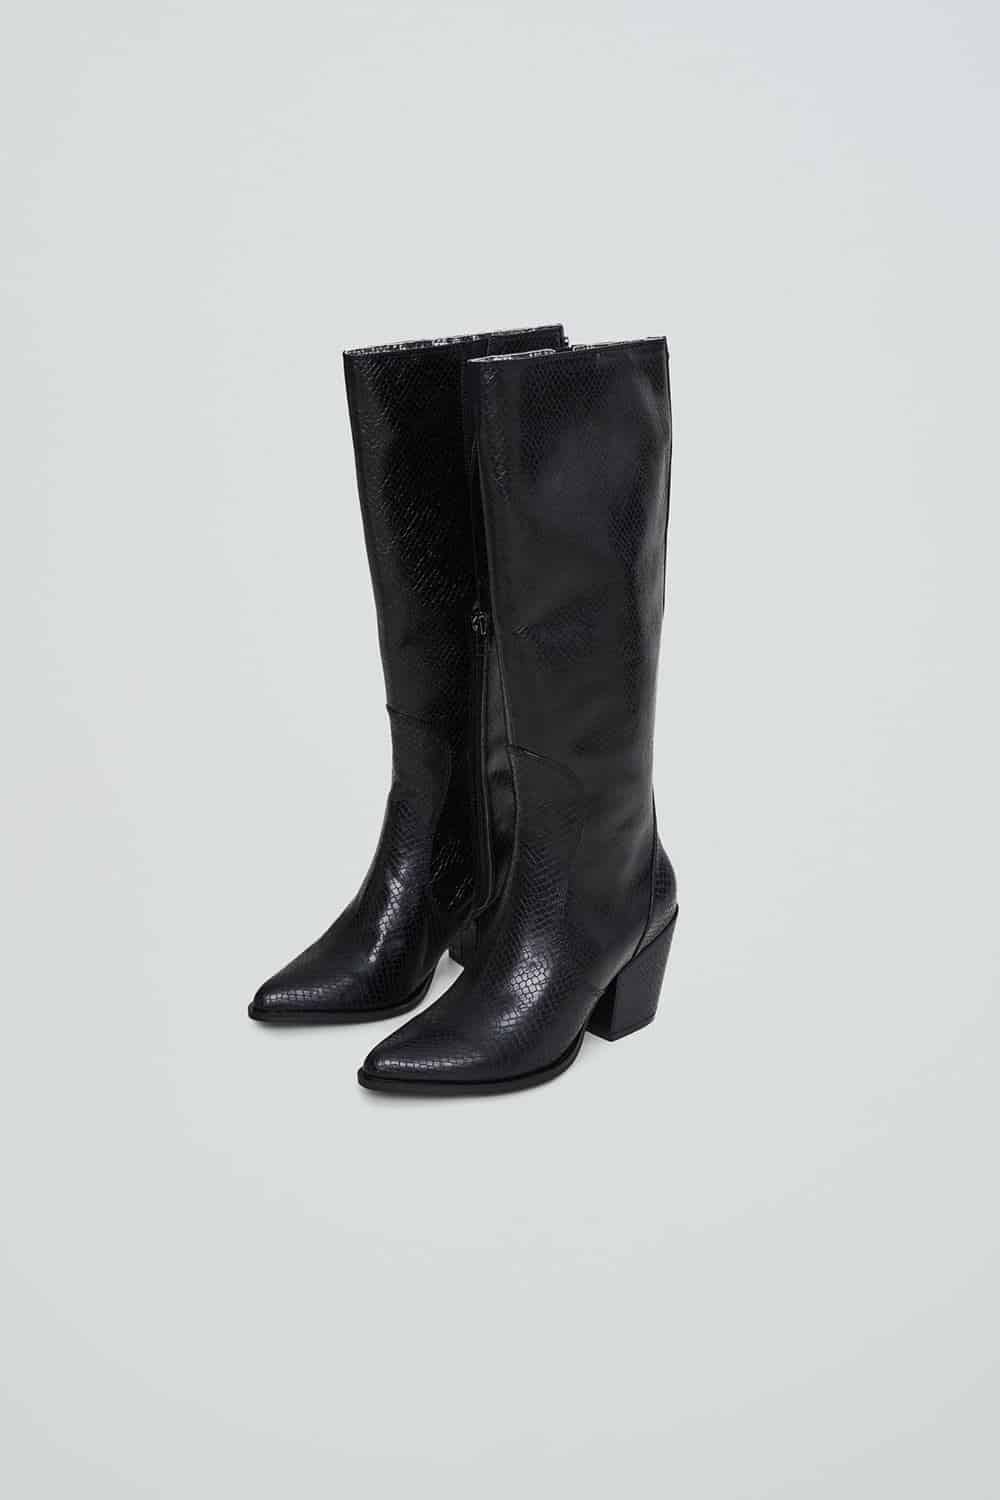 Knee high black snakeskin effect heeled boots from Noize